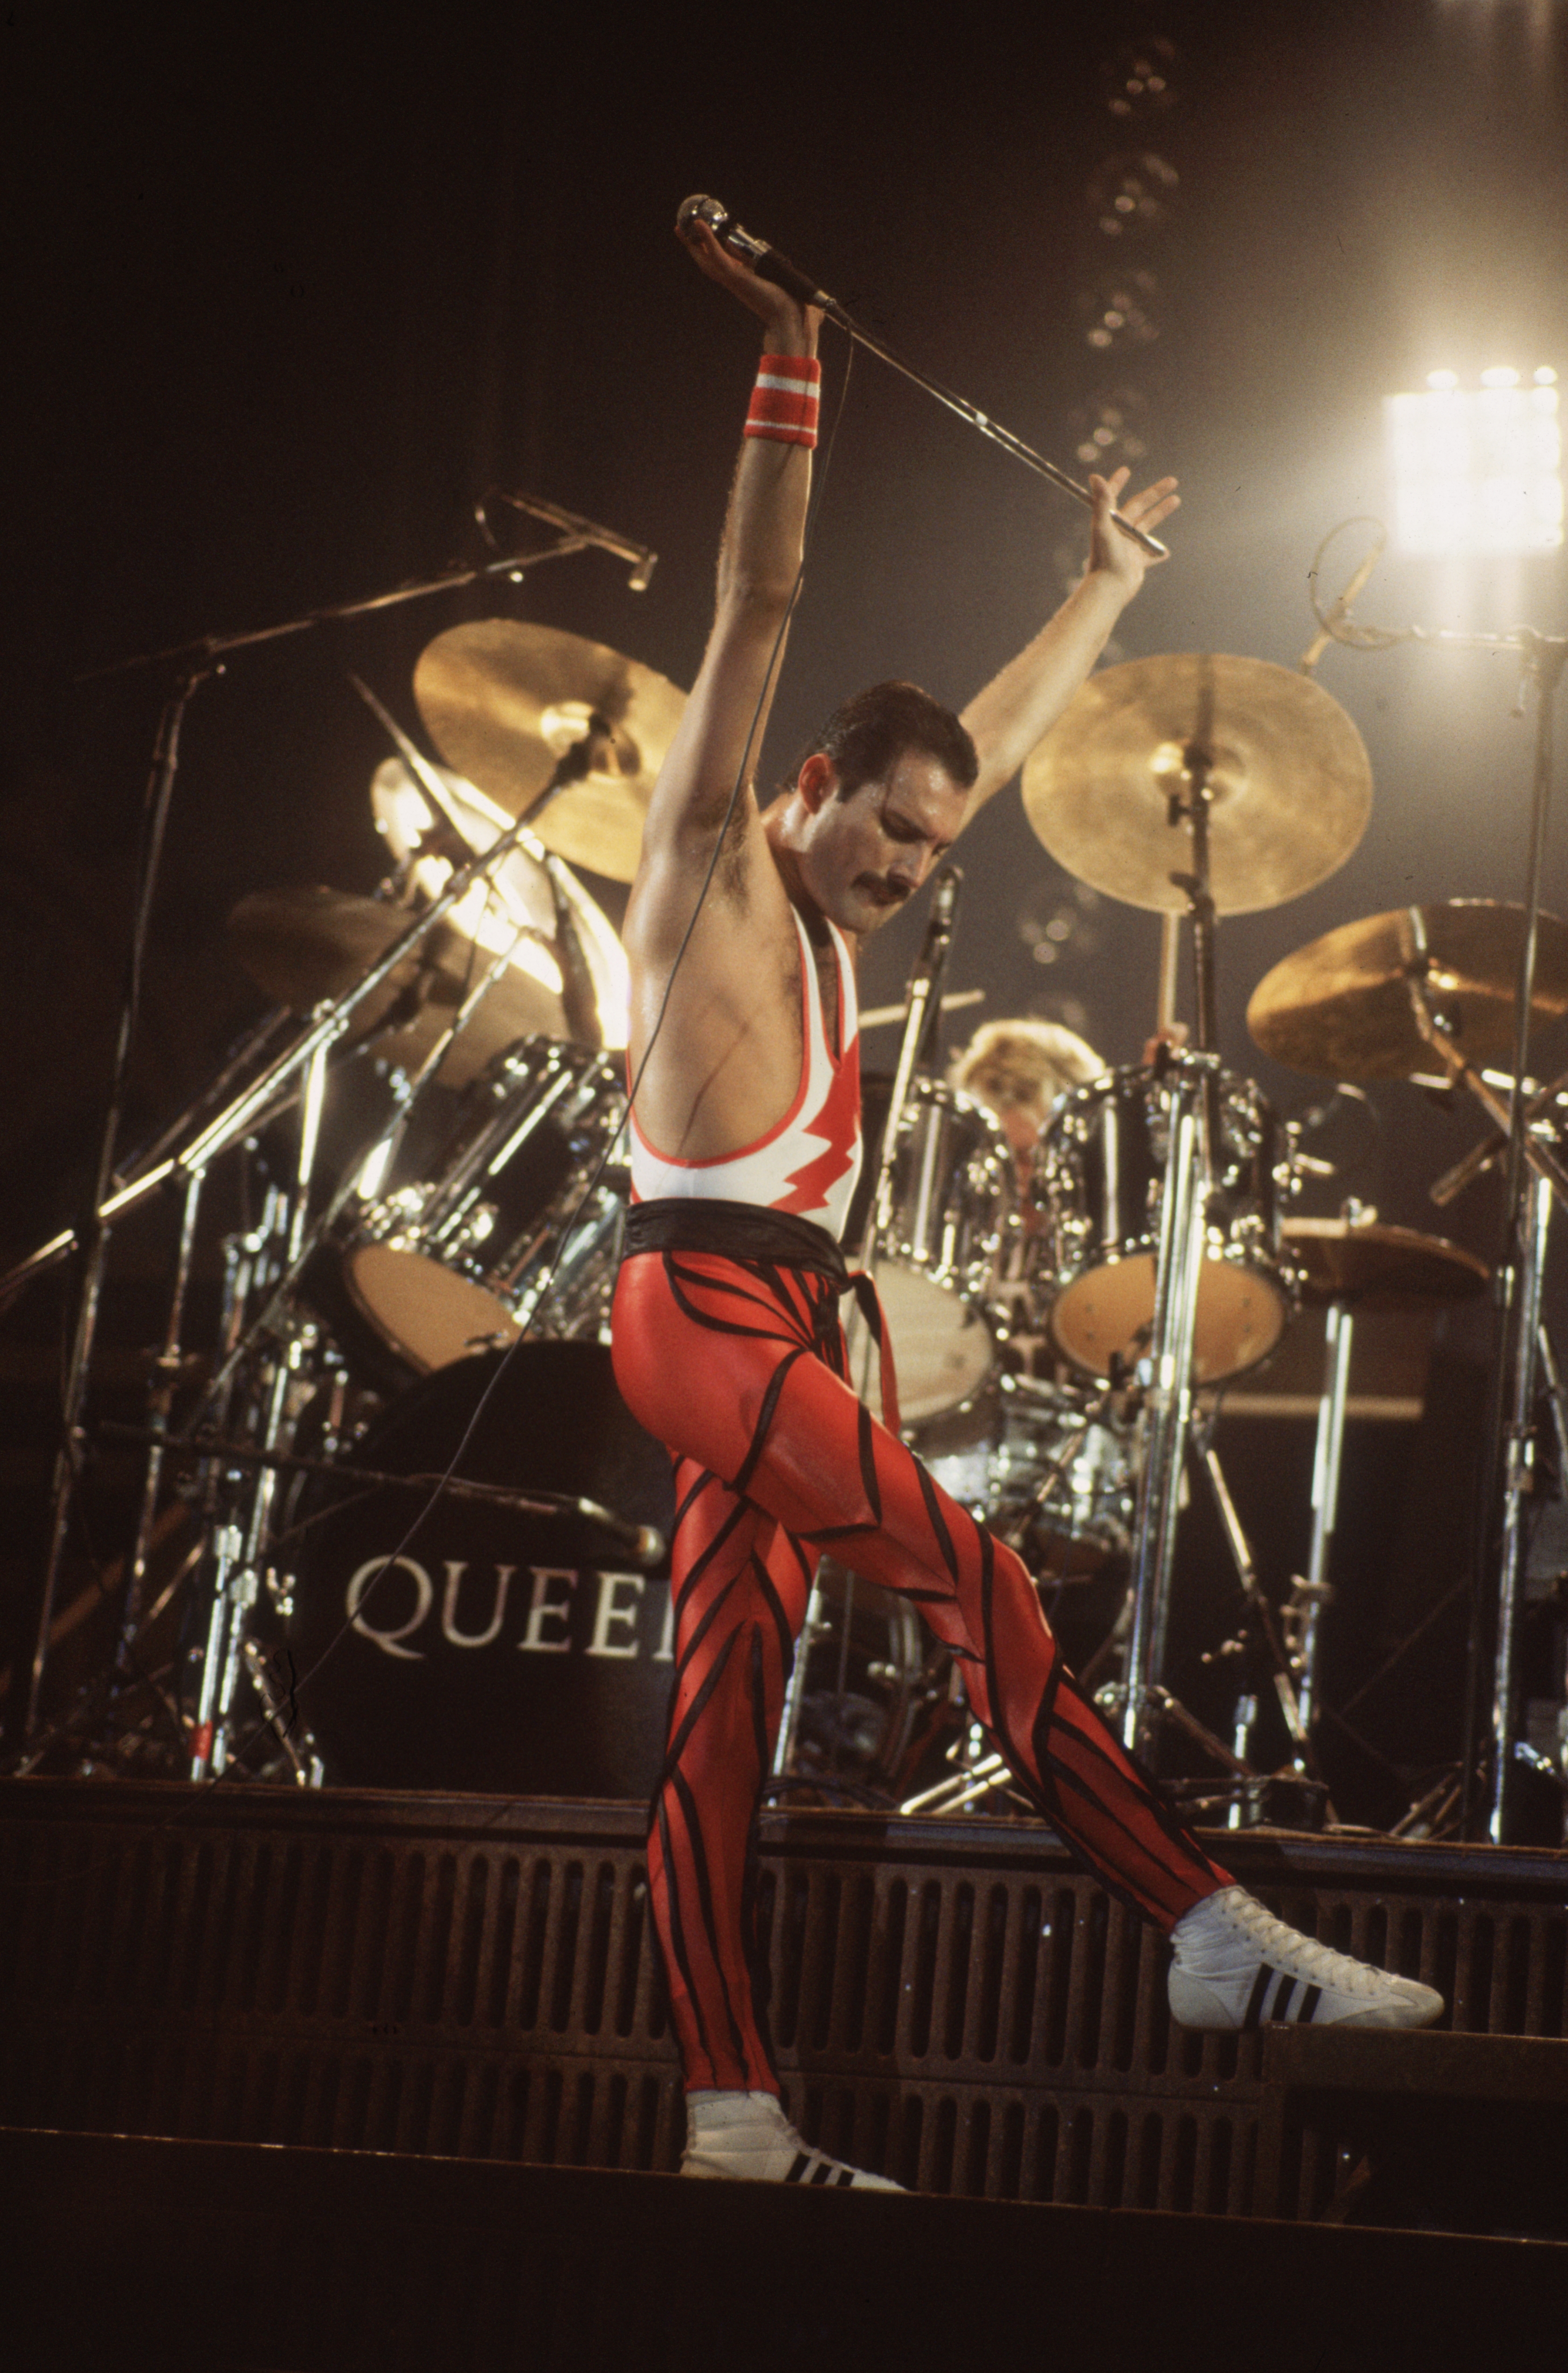 1984: Freddie Mercury (1946 - 1991), lead singer of 70s hard rock quartet Queen, in concert. (Photo by Hulton Archive/Getty Images)